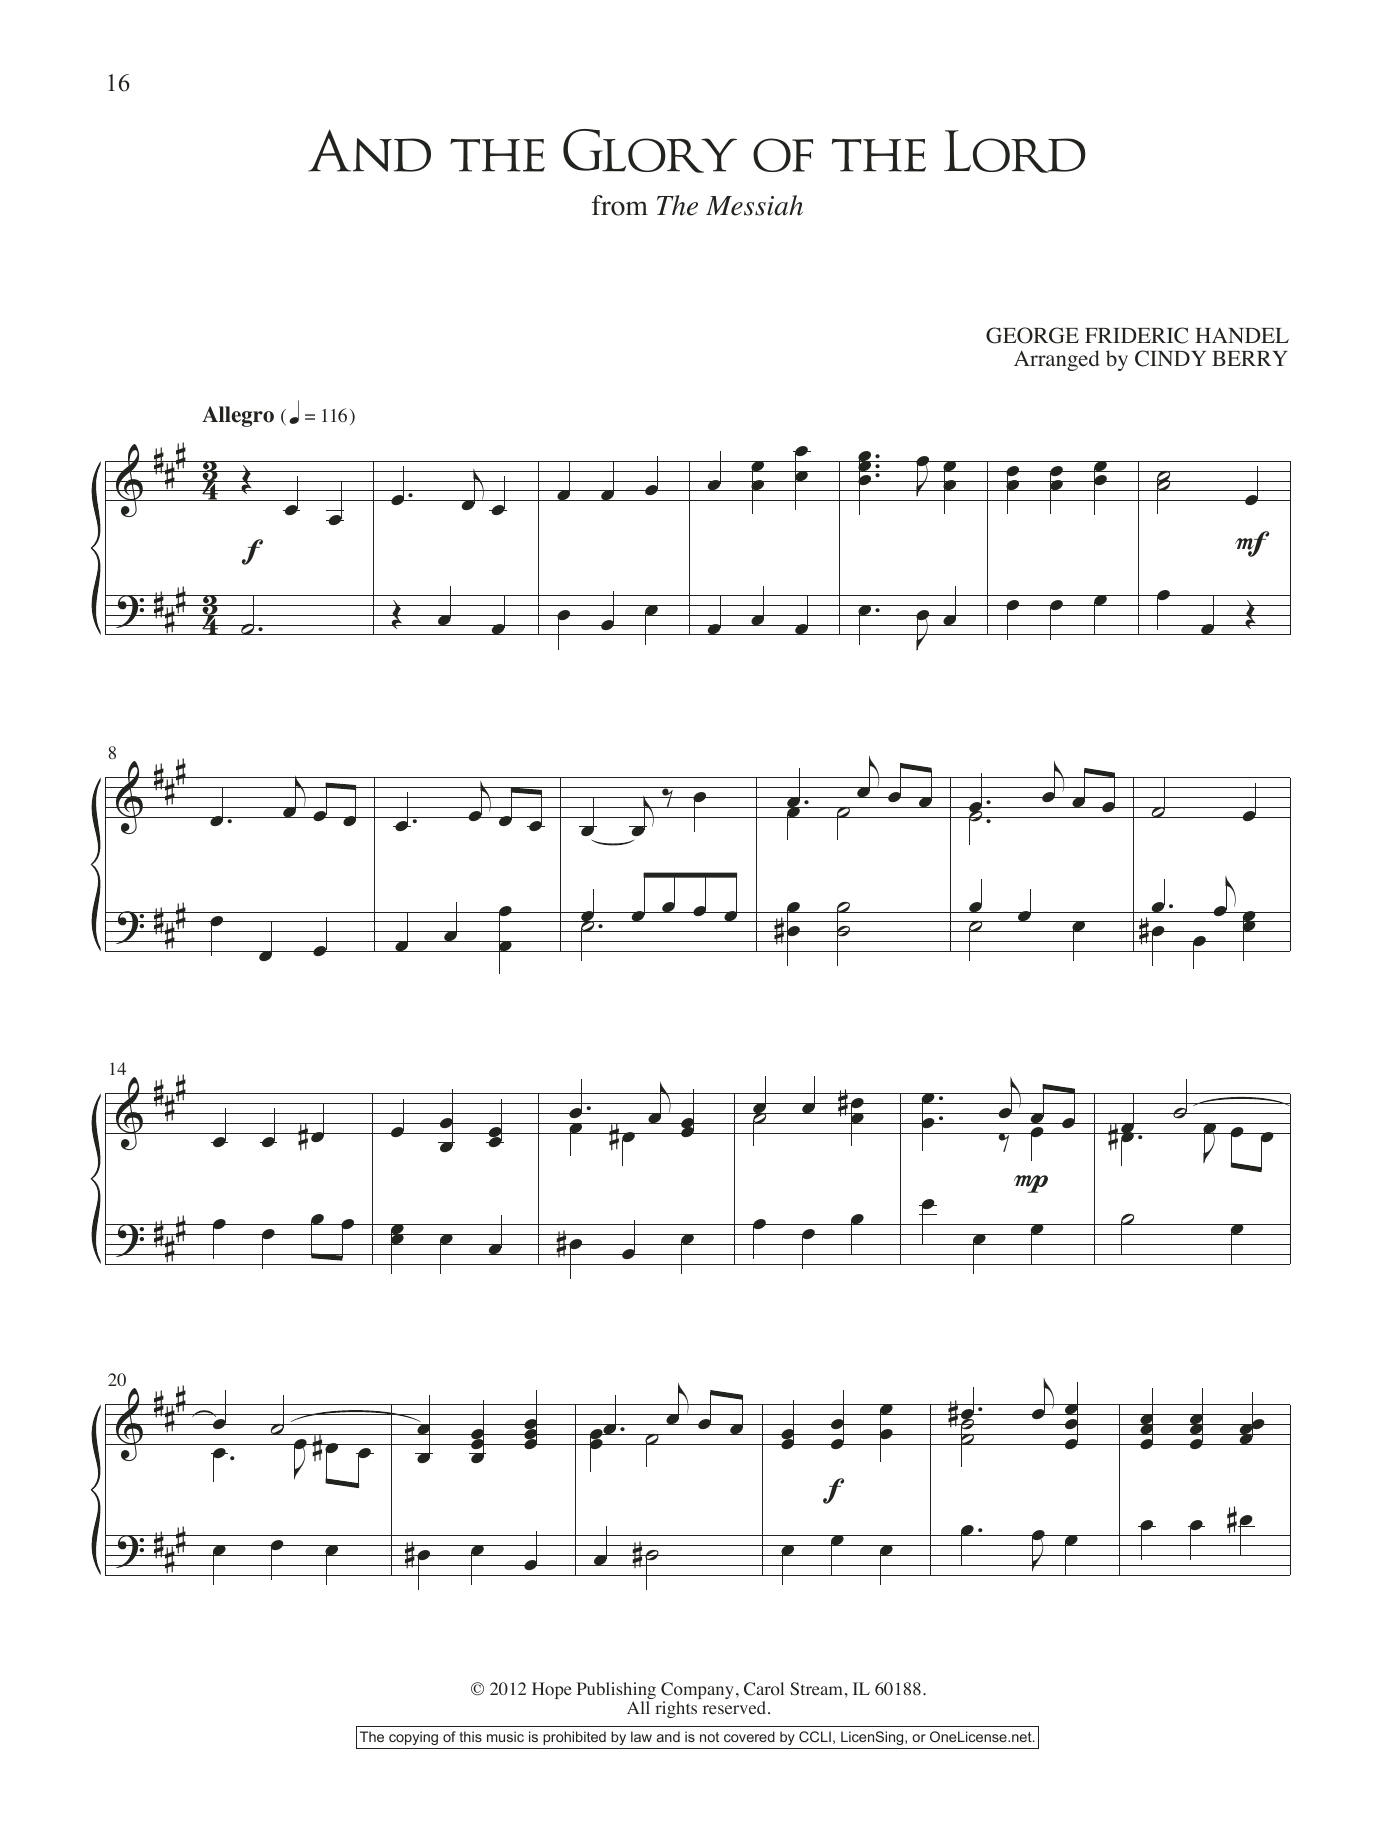 Download Cindy Berry And the Glory of the Lord Sheet Music